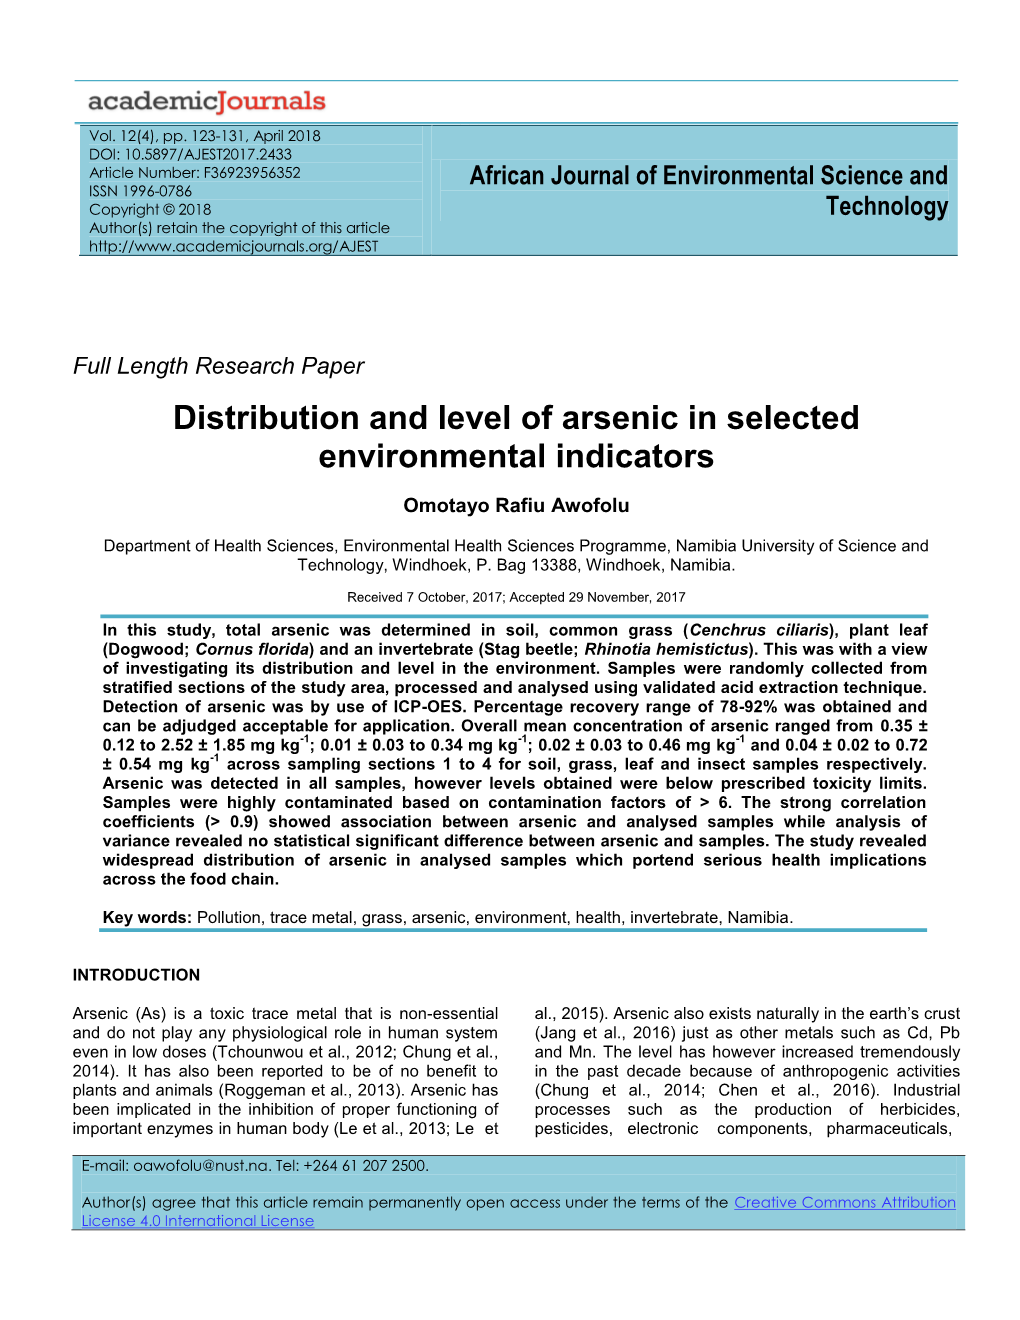 Distribution and Level of Arsenic in Selected Environmental Indicators